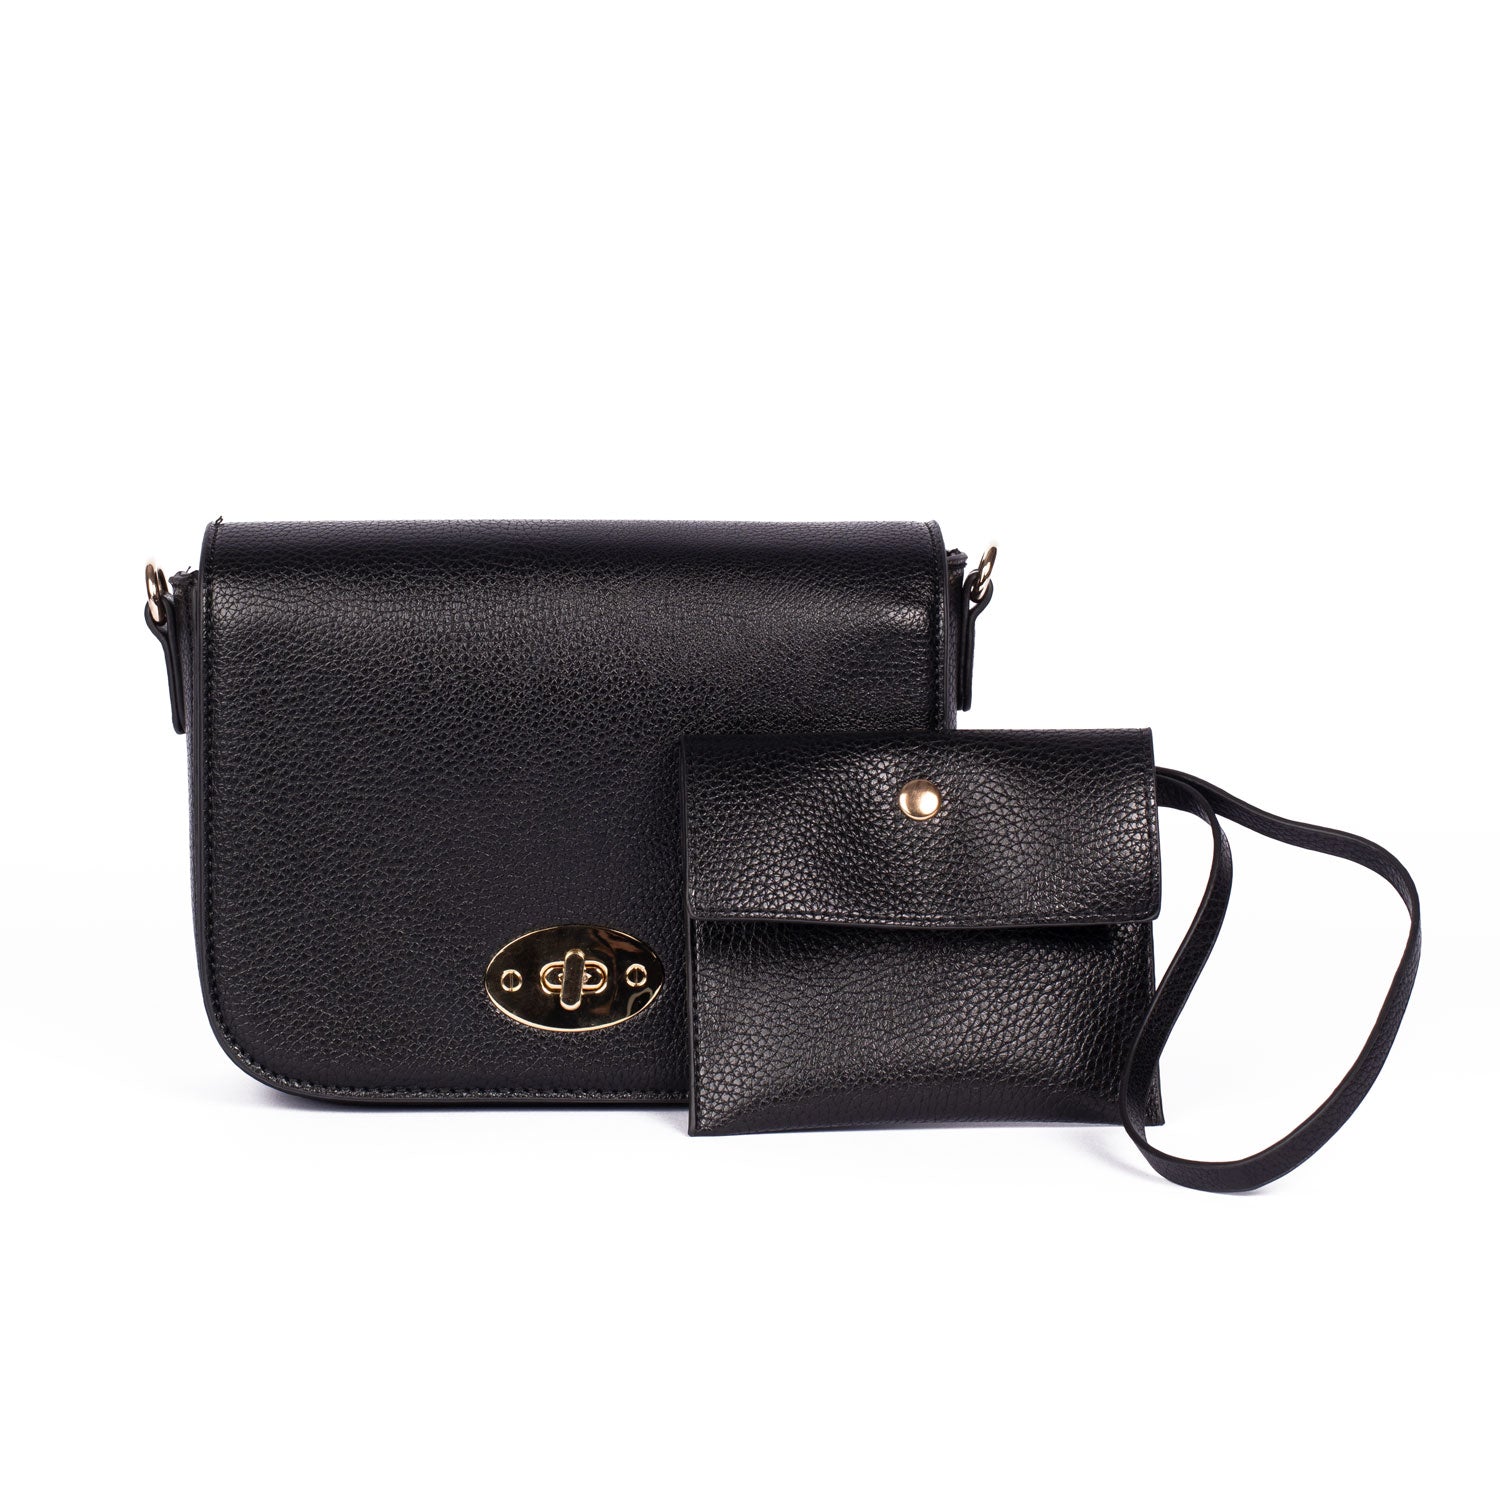 Chanel Leather Designer Shoulder Bag: Luxury Mini Crossbody With Metal Lock,  Compact & Fashionable For Women From Rainbowhandbag, $80.27 | DHgate.Com